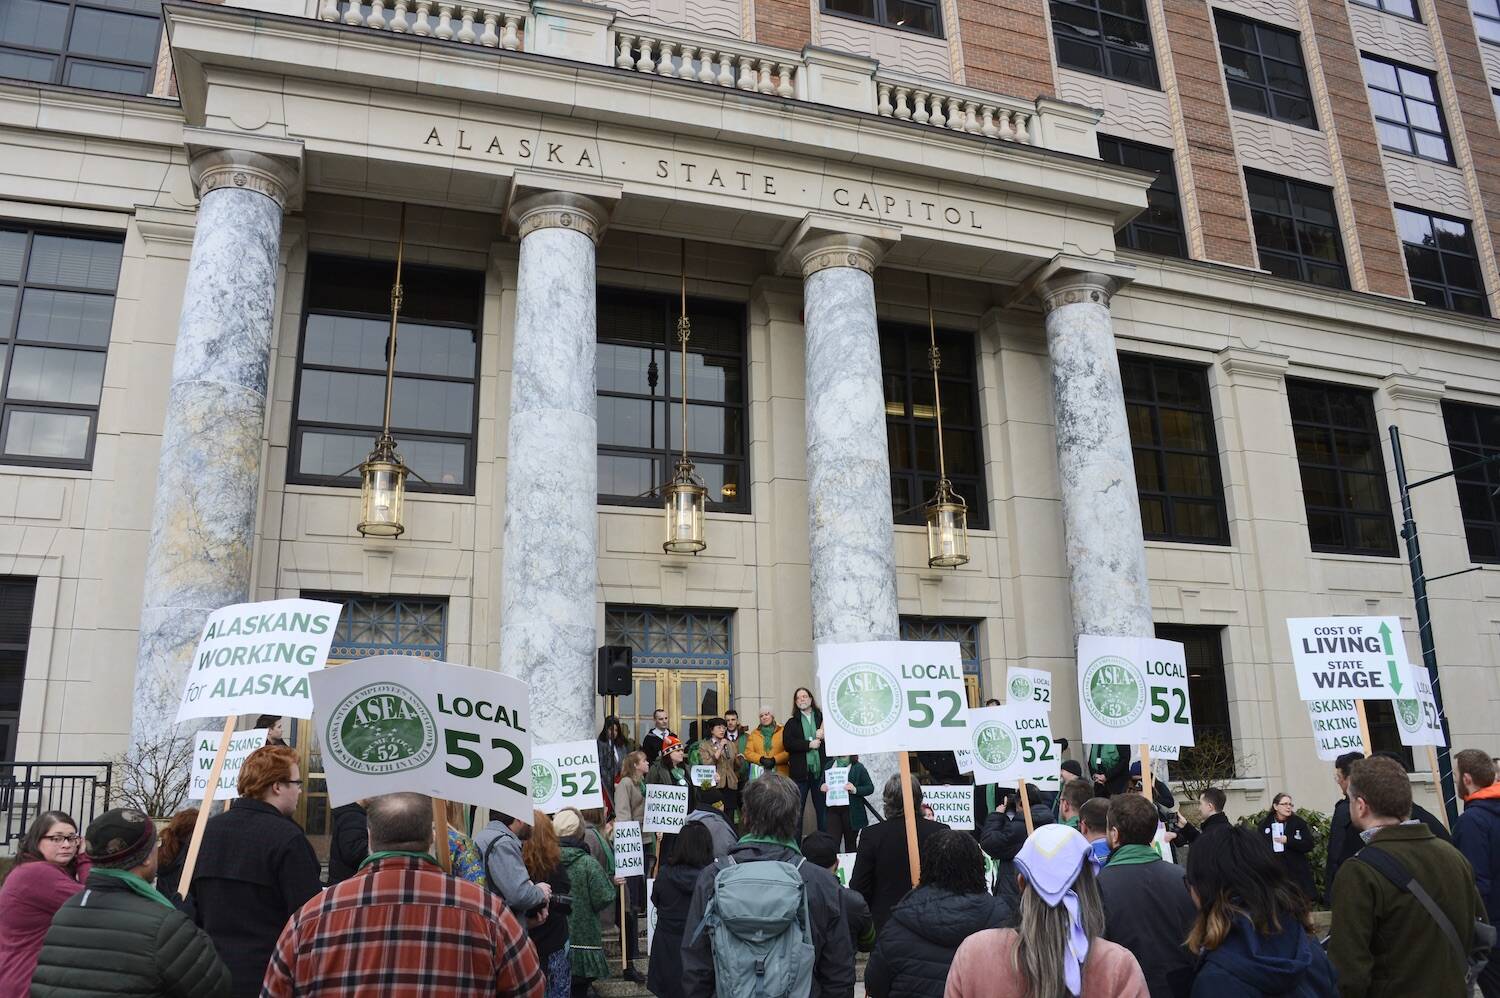 Members of ASEA/AFSCME Local 52 protest on Feb. 10, 2023, in front of the Alaska State Capitol. (Photo by James Brooks/Alaska Beacon)